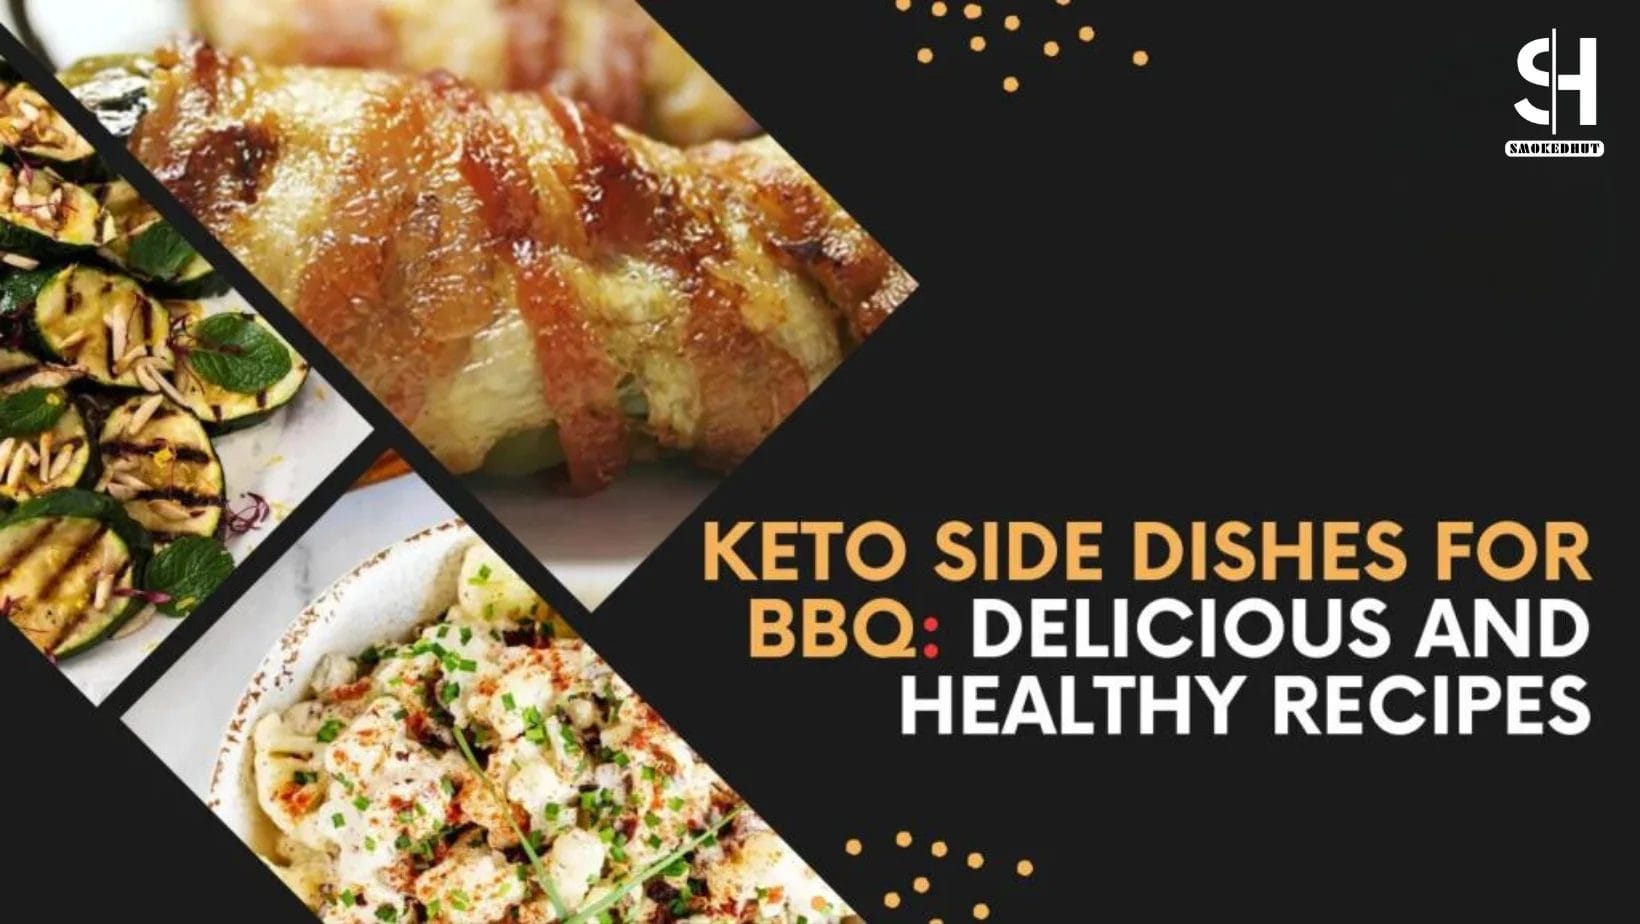 Keto Side Dishes for BBQ Delicious and Healthy Recipes